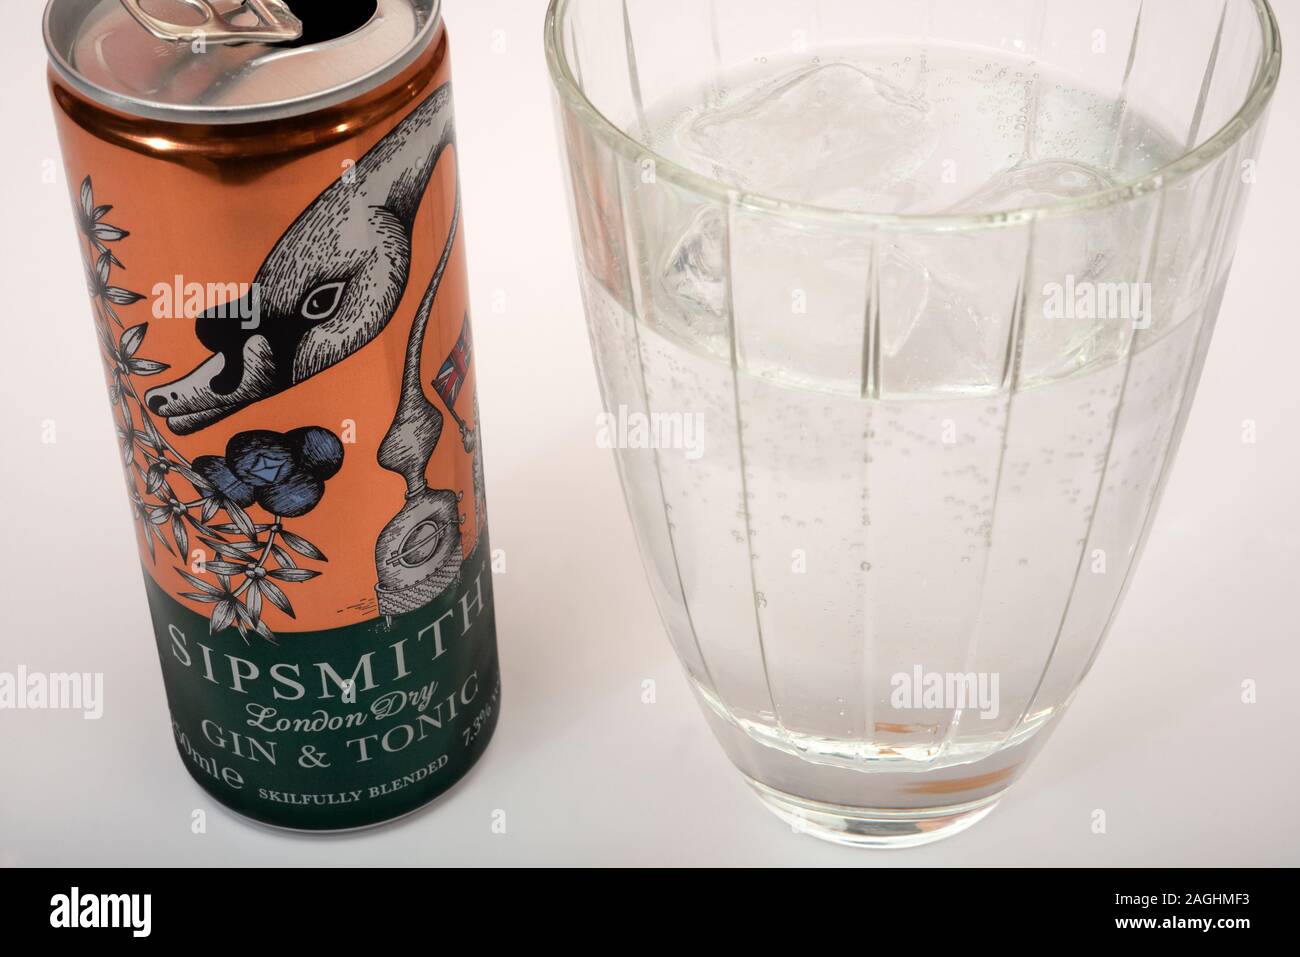 Sipsmith London Dry gin and tonic Stock Photo